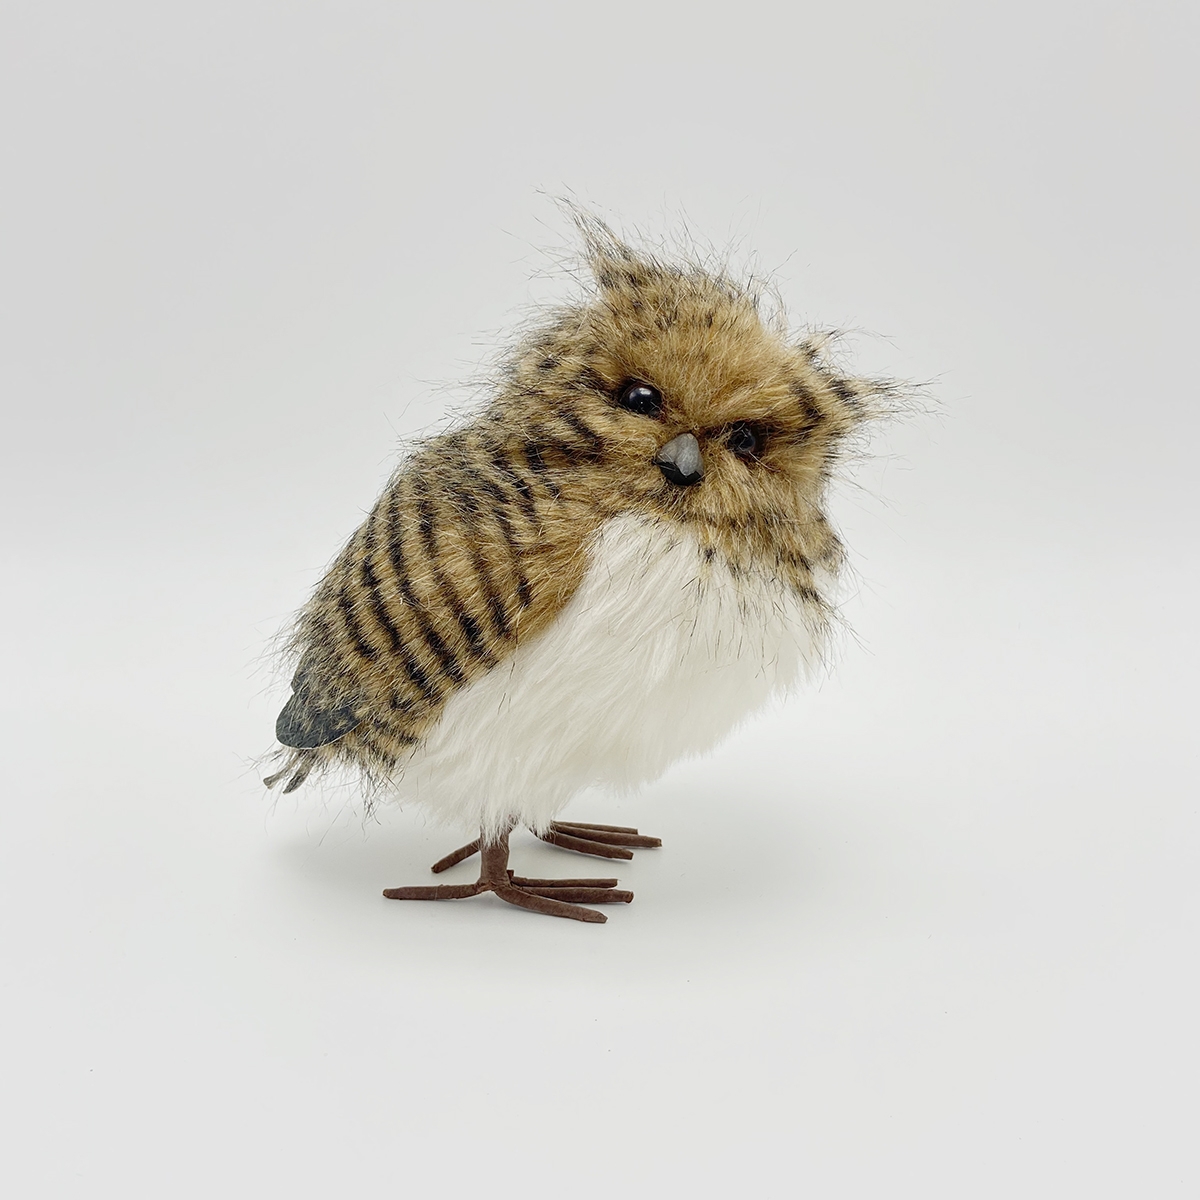 15*12*19CM Soft Yarn and Feathers Brown Owl Figurine-GOON- Home Decoration, Christmas Decoration, Halloween Decor, Harvest Decor, Easter Decor, Thanksgiving Day Decor, Party Decor